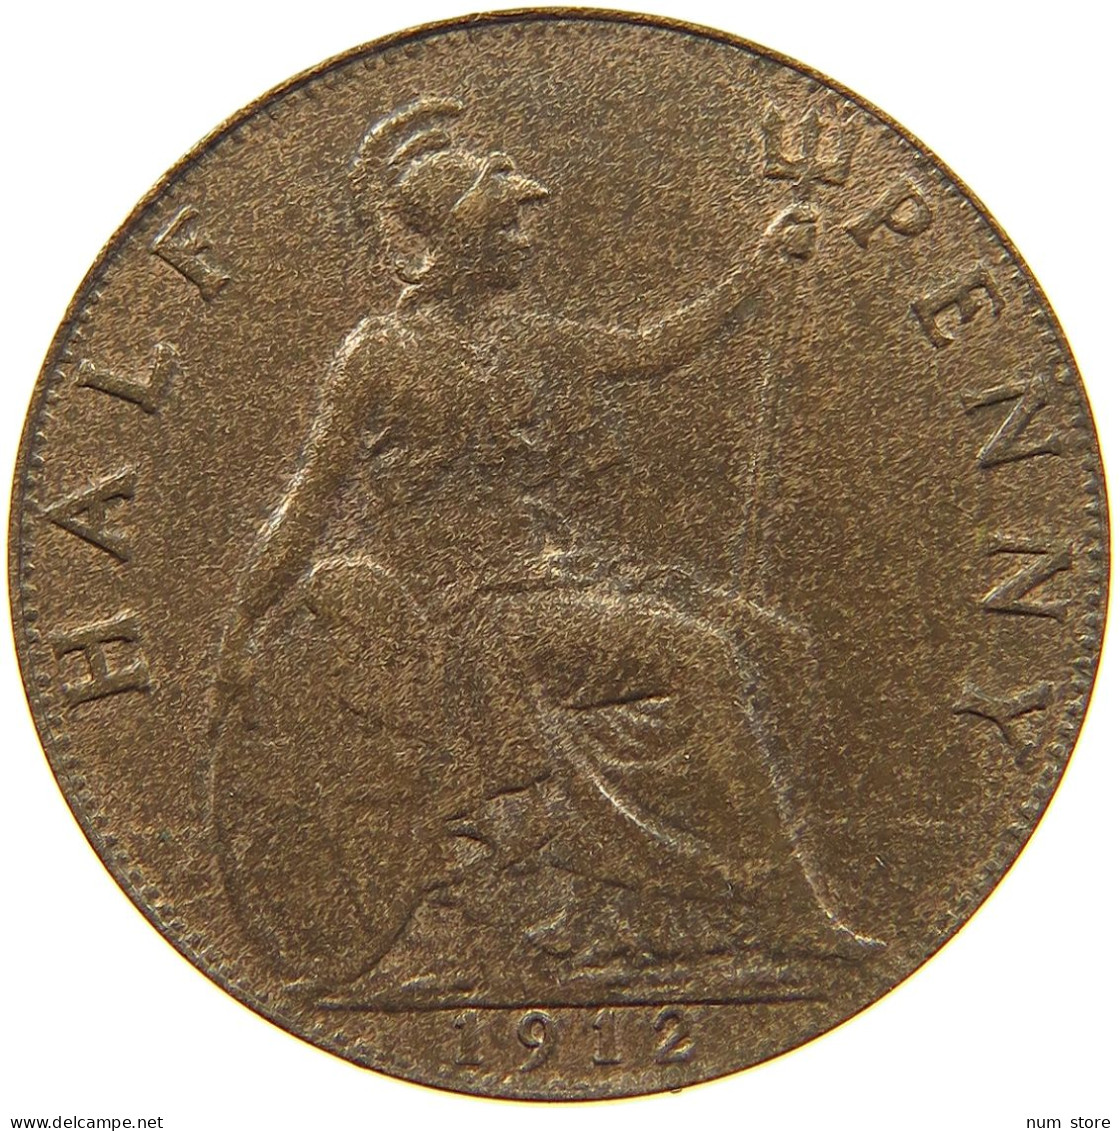 GREAT BRITAIN HALFPENNY 1912 George V. (1910-1936) #t006 0255 - C. 1/2 Penny